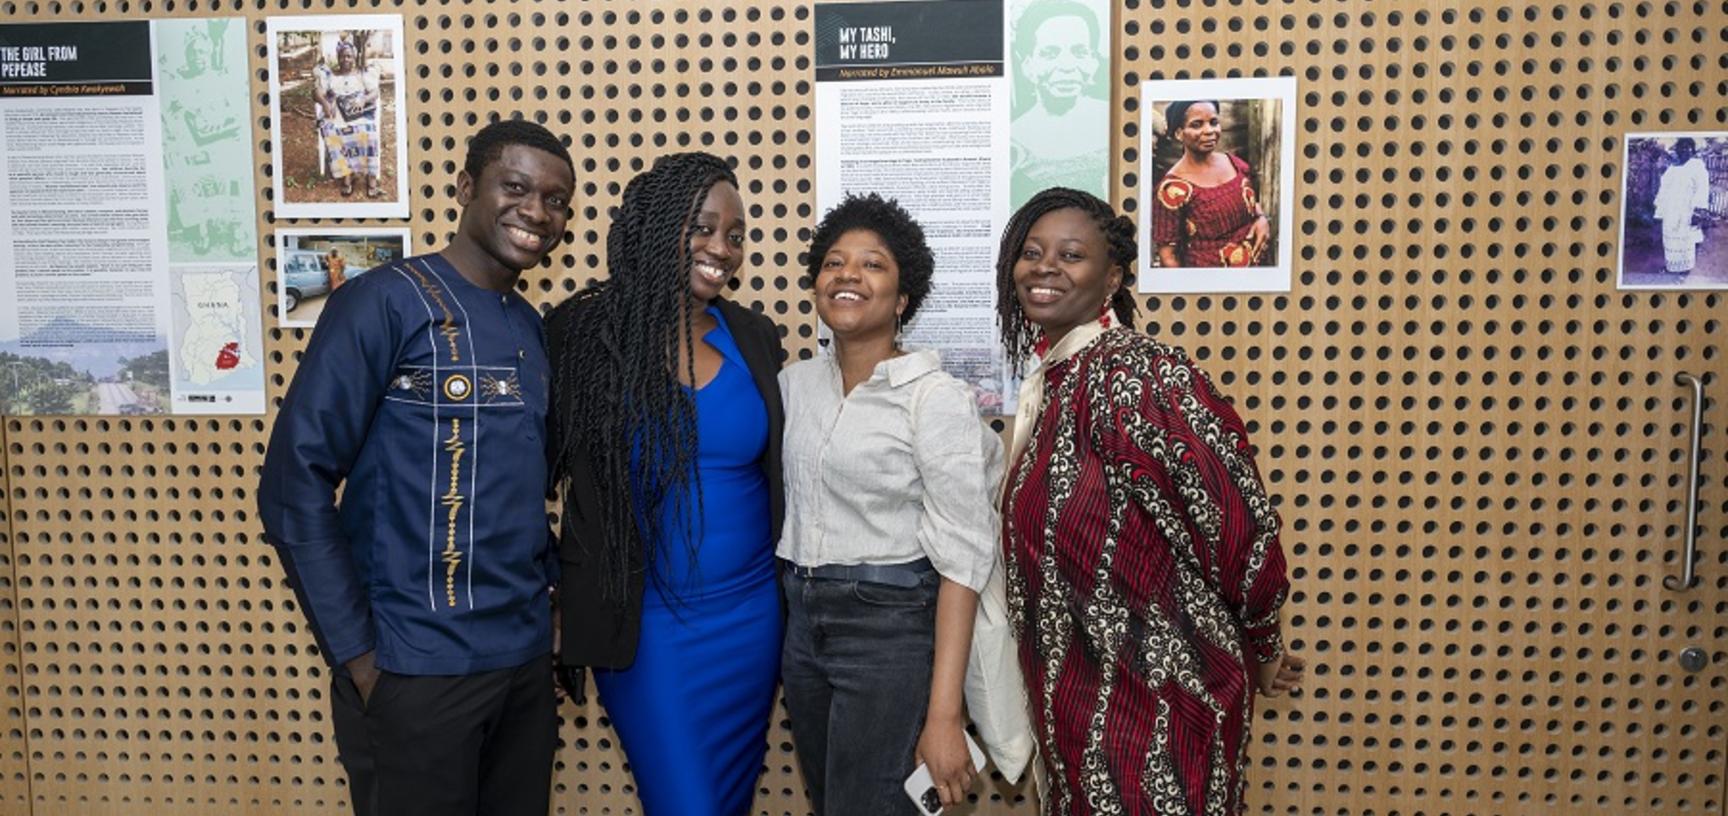 4 people smile at the camera in front of the poster exhibit